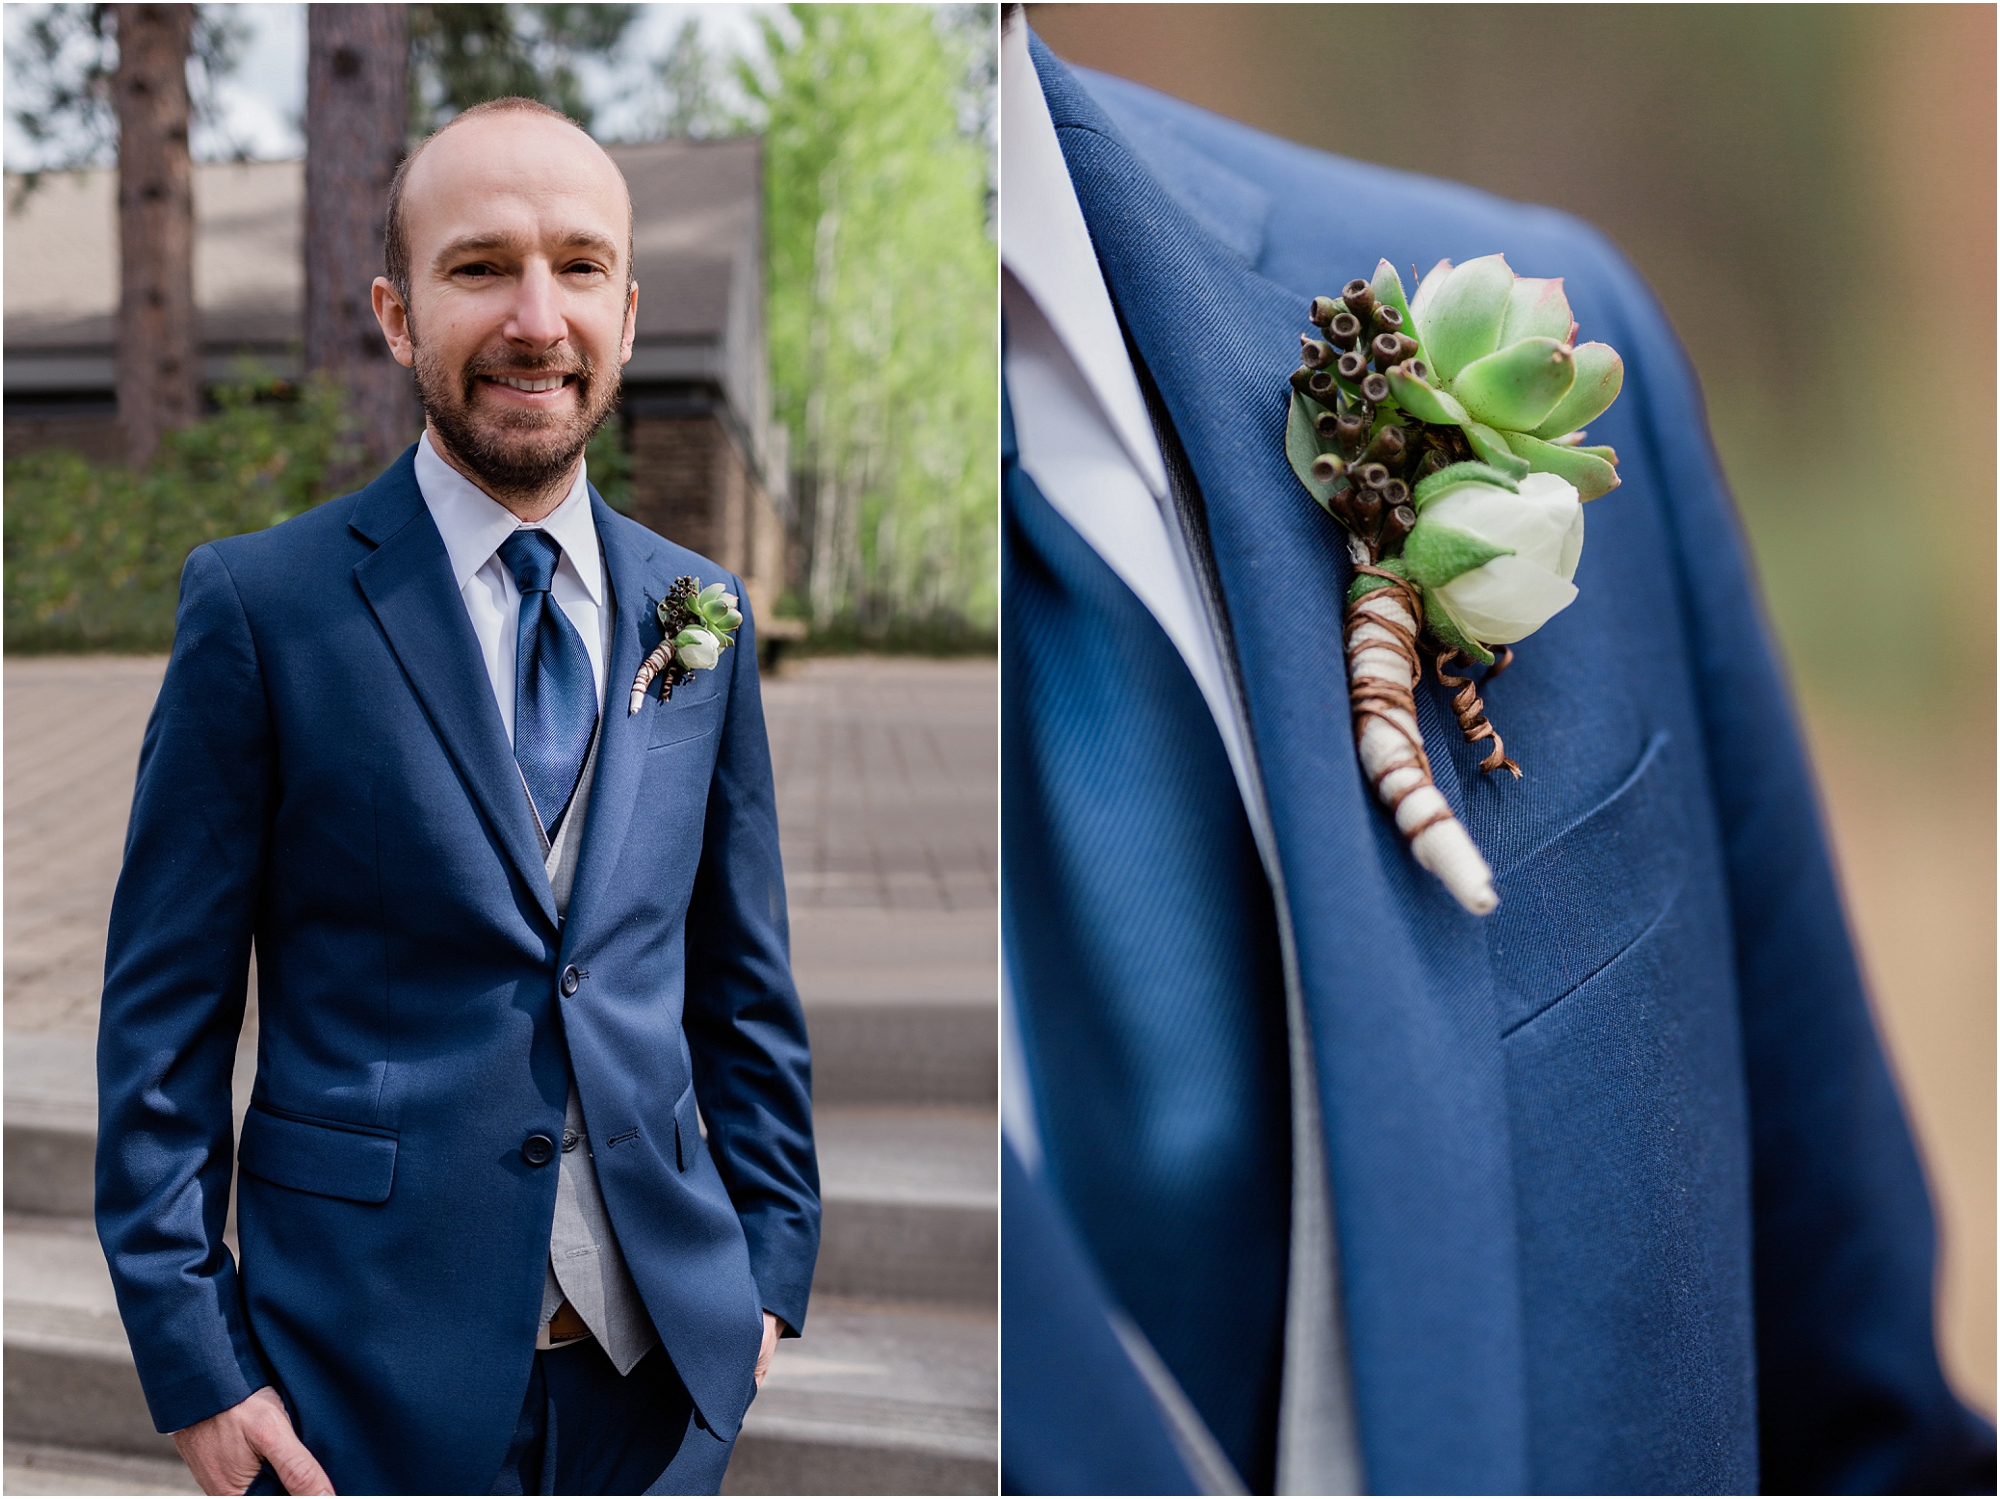 Such a handsome groom in his blue suit with succulent boutonniere at his Bend, OR wedding. | Erica Swantek Photography